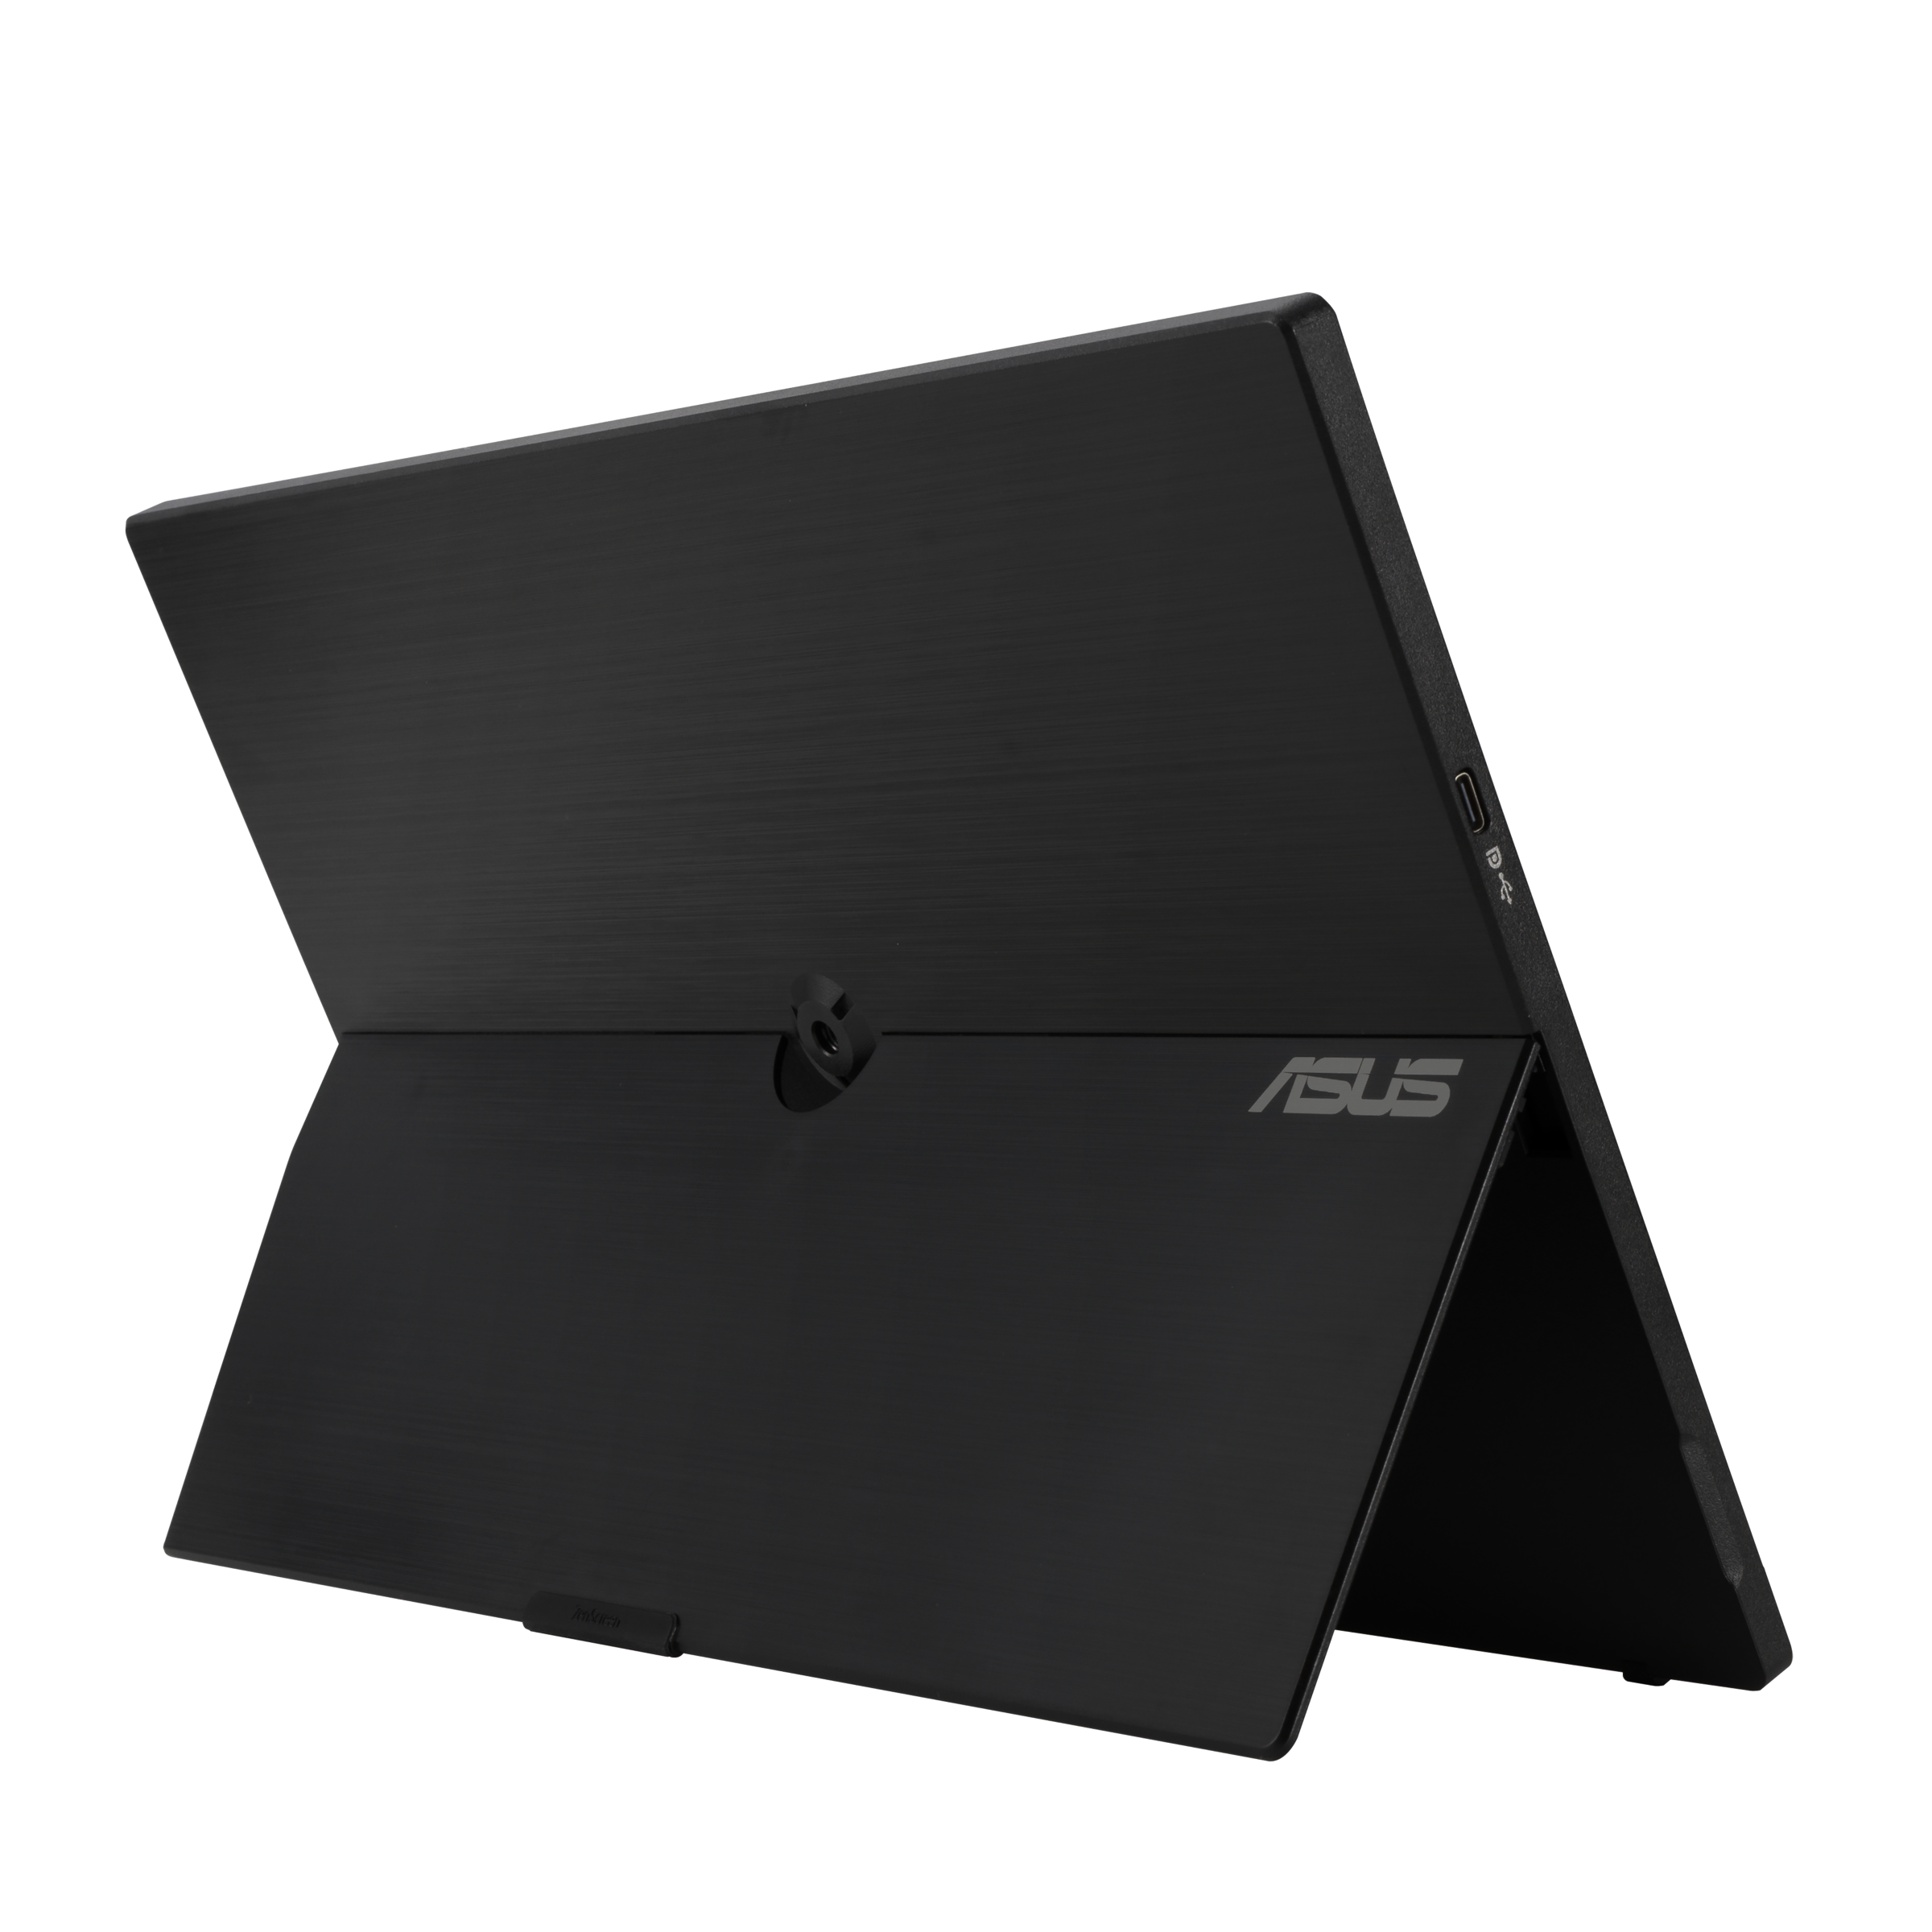  ASUS ZenScreen 15.6” 1080P Portable Monitor (MB16ACV) - Full  HD, IPS, Eye Care, Flicker Free, Blue Light Filter, Kickstand, USB-C Power  Delivery, for Laptop, PC, Phone, Console